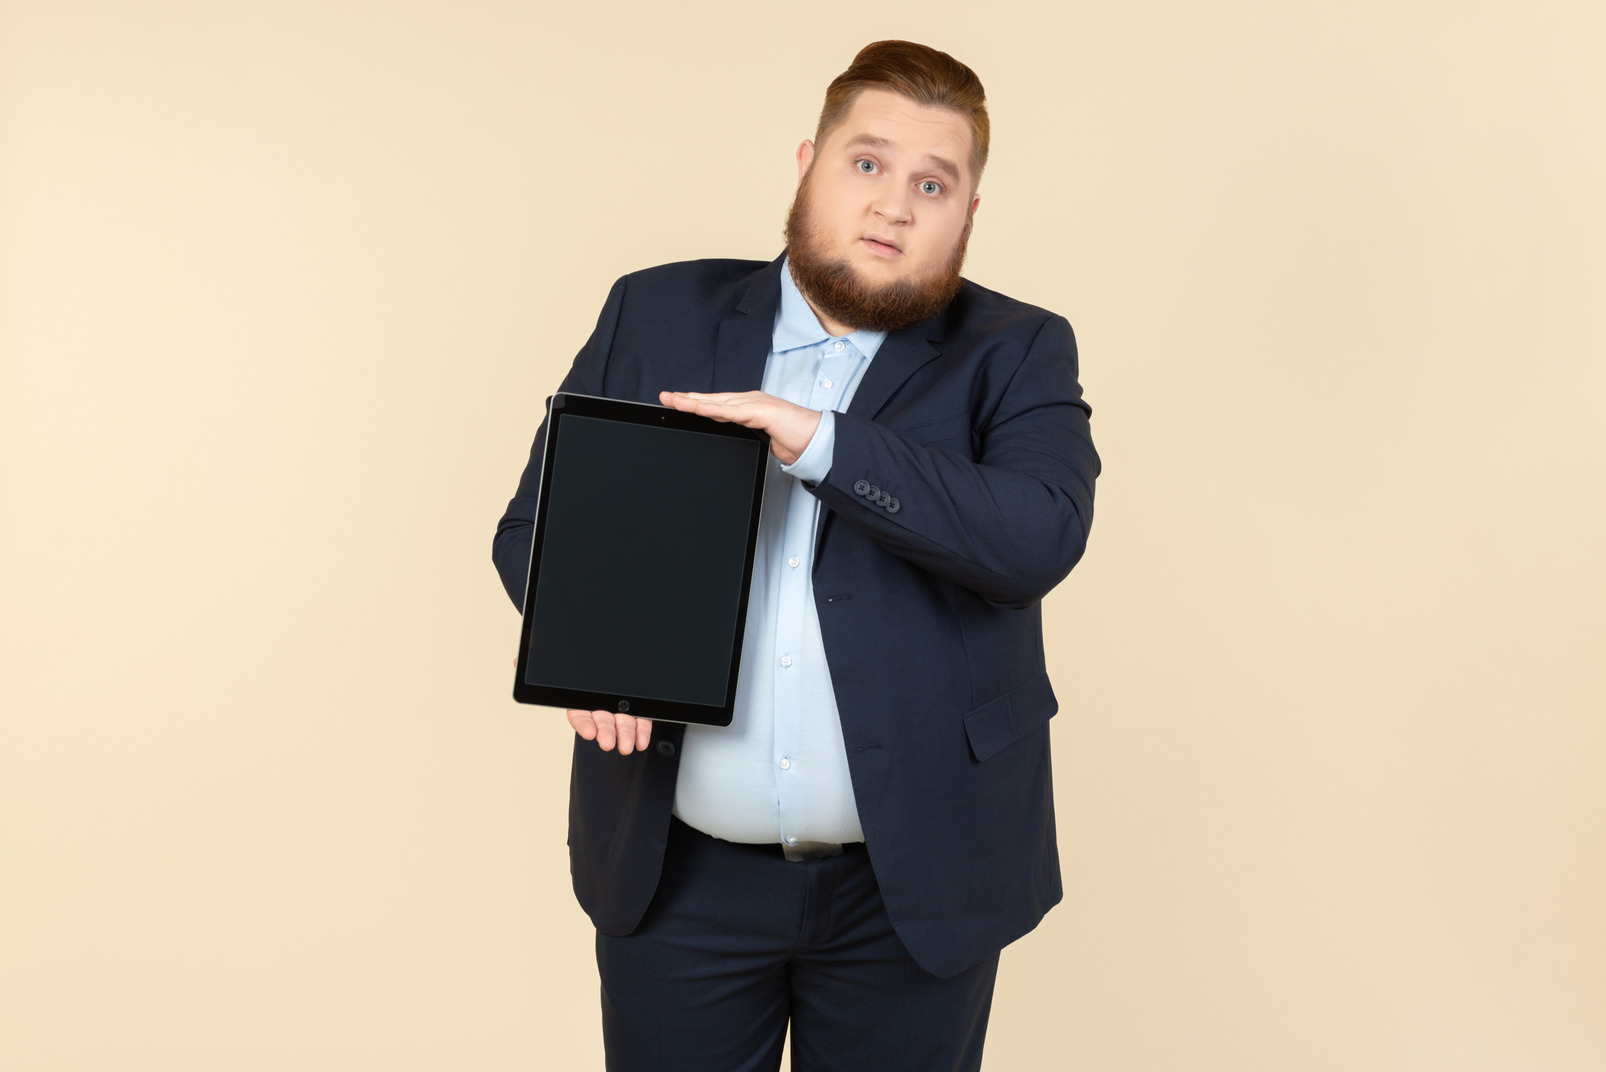 Young overweight man holding digital tablet vertically